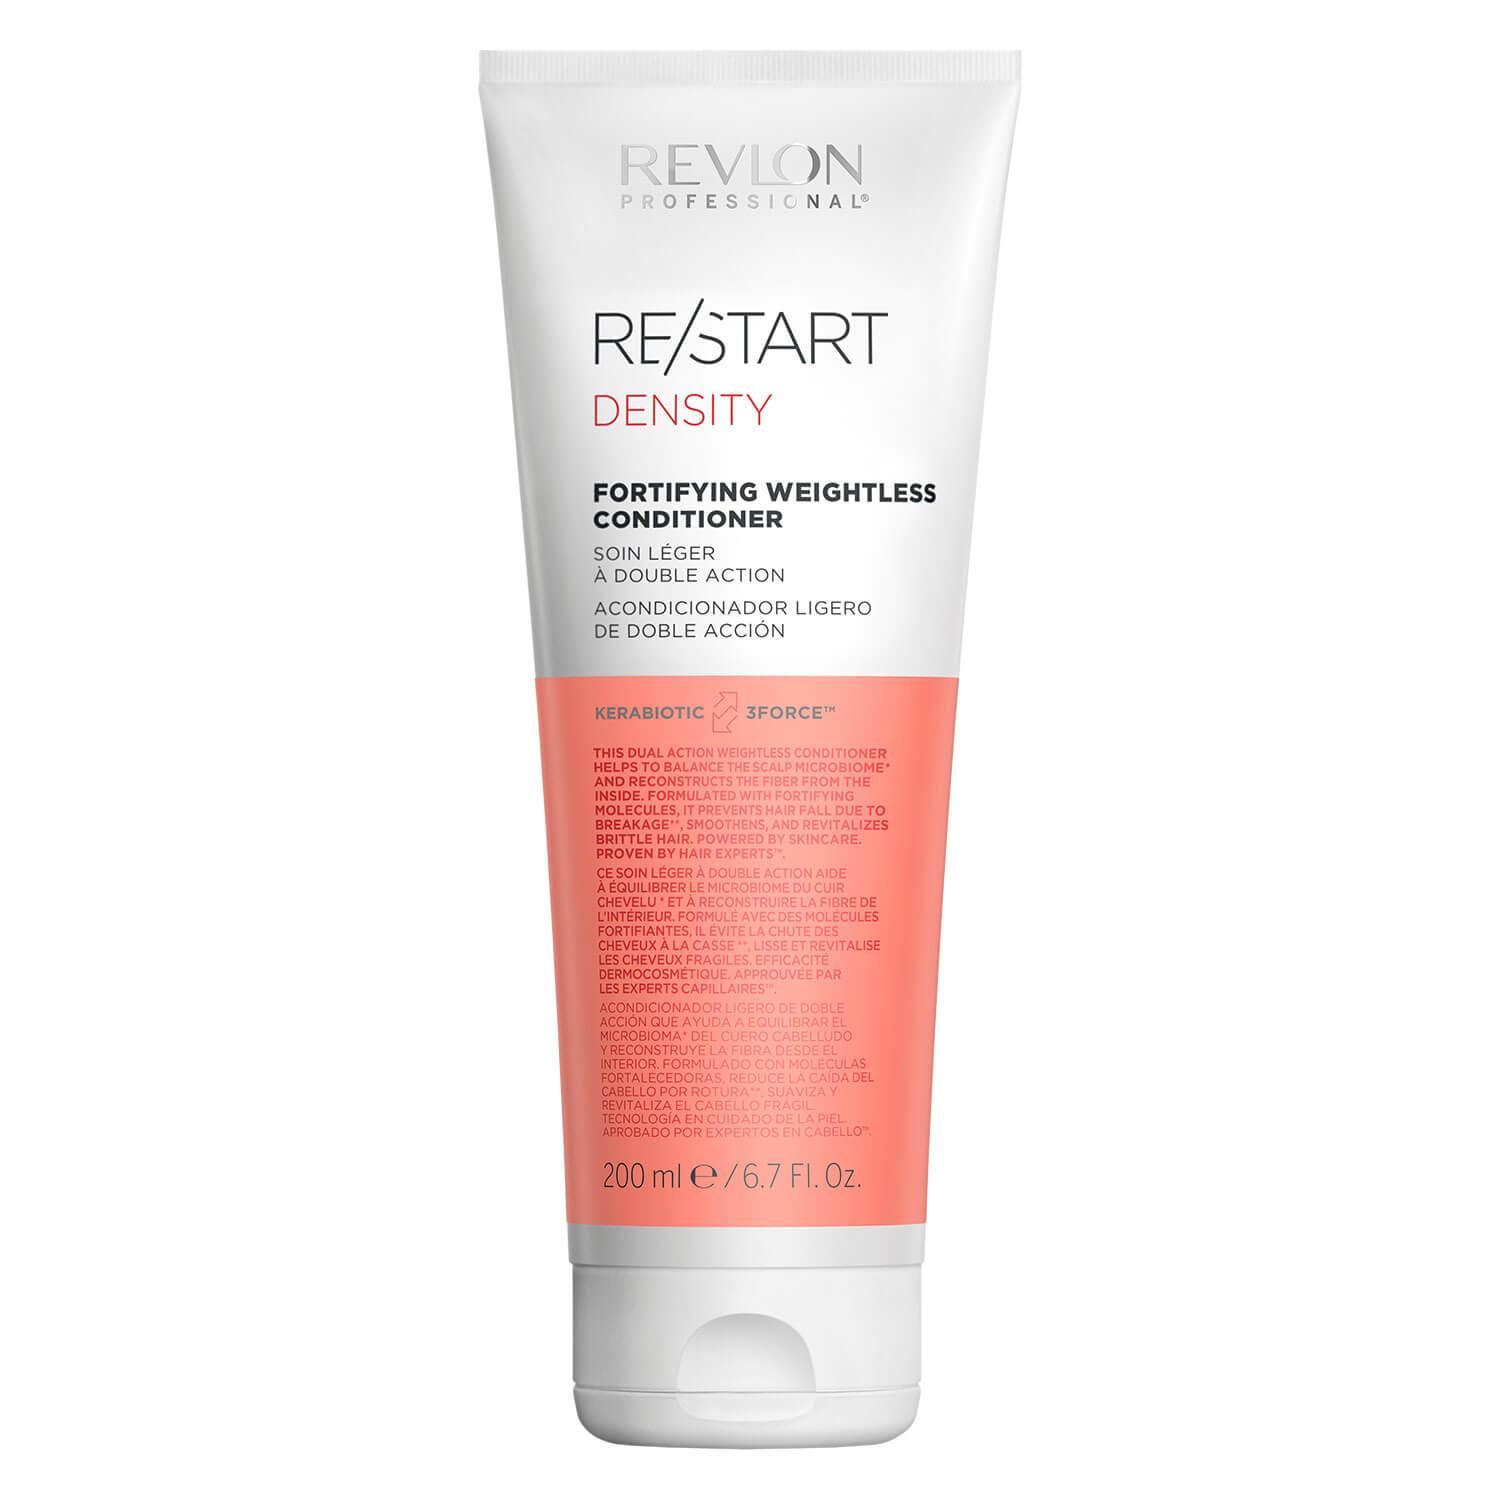 RE/START DENSITY - Fortifying Weightless Conditioner